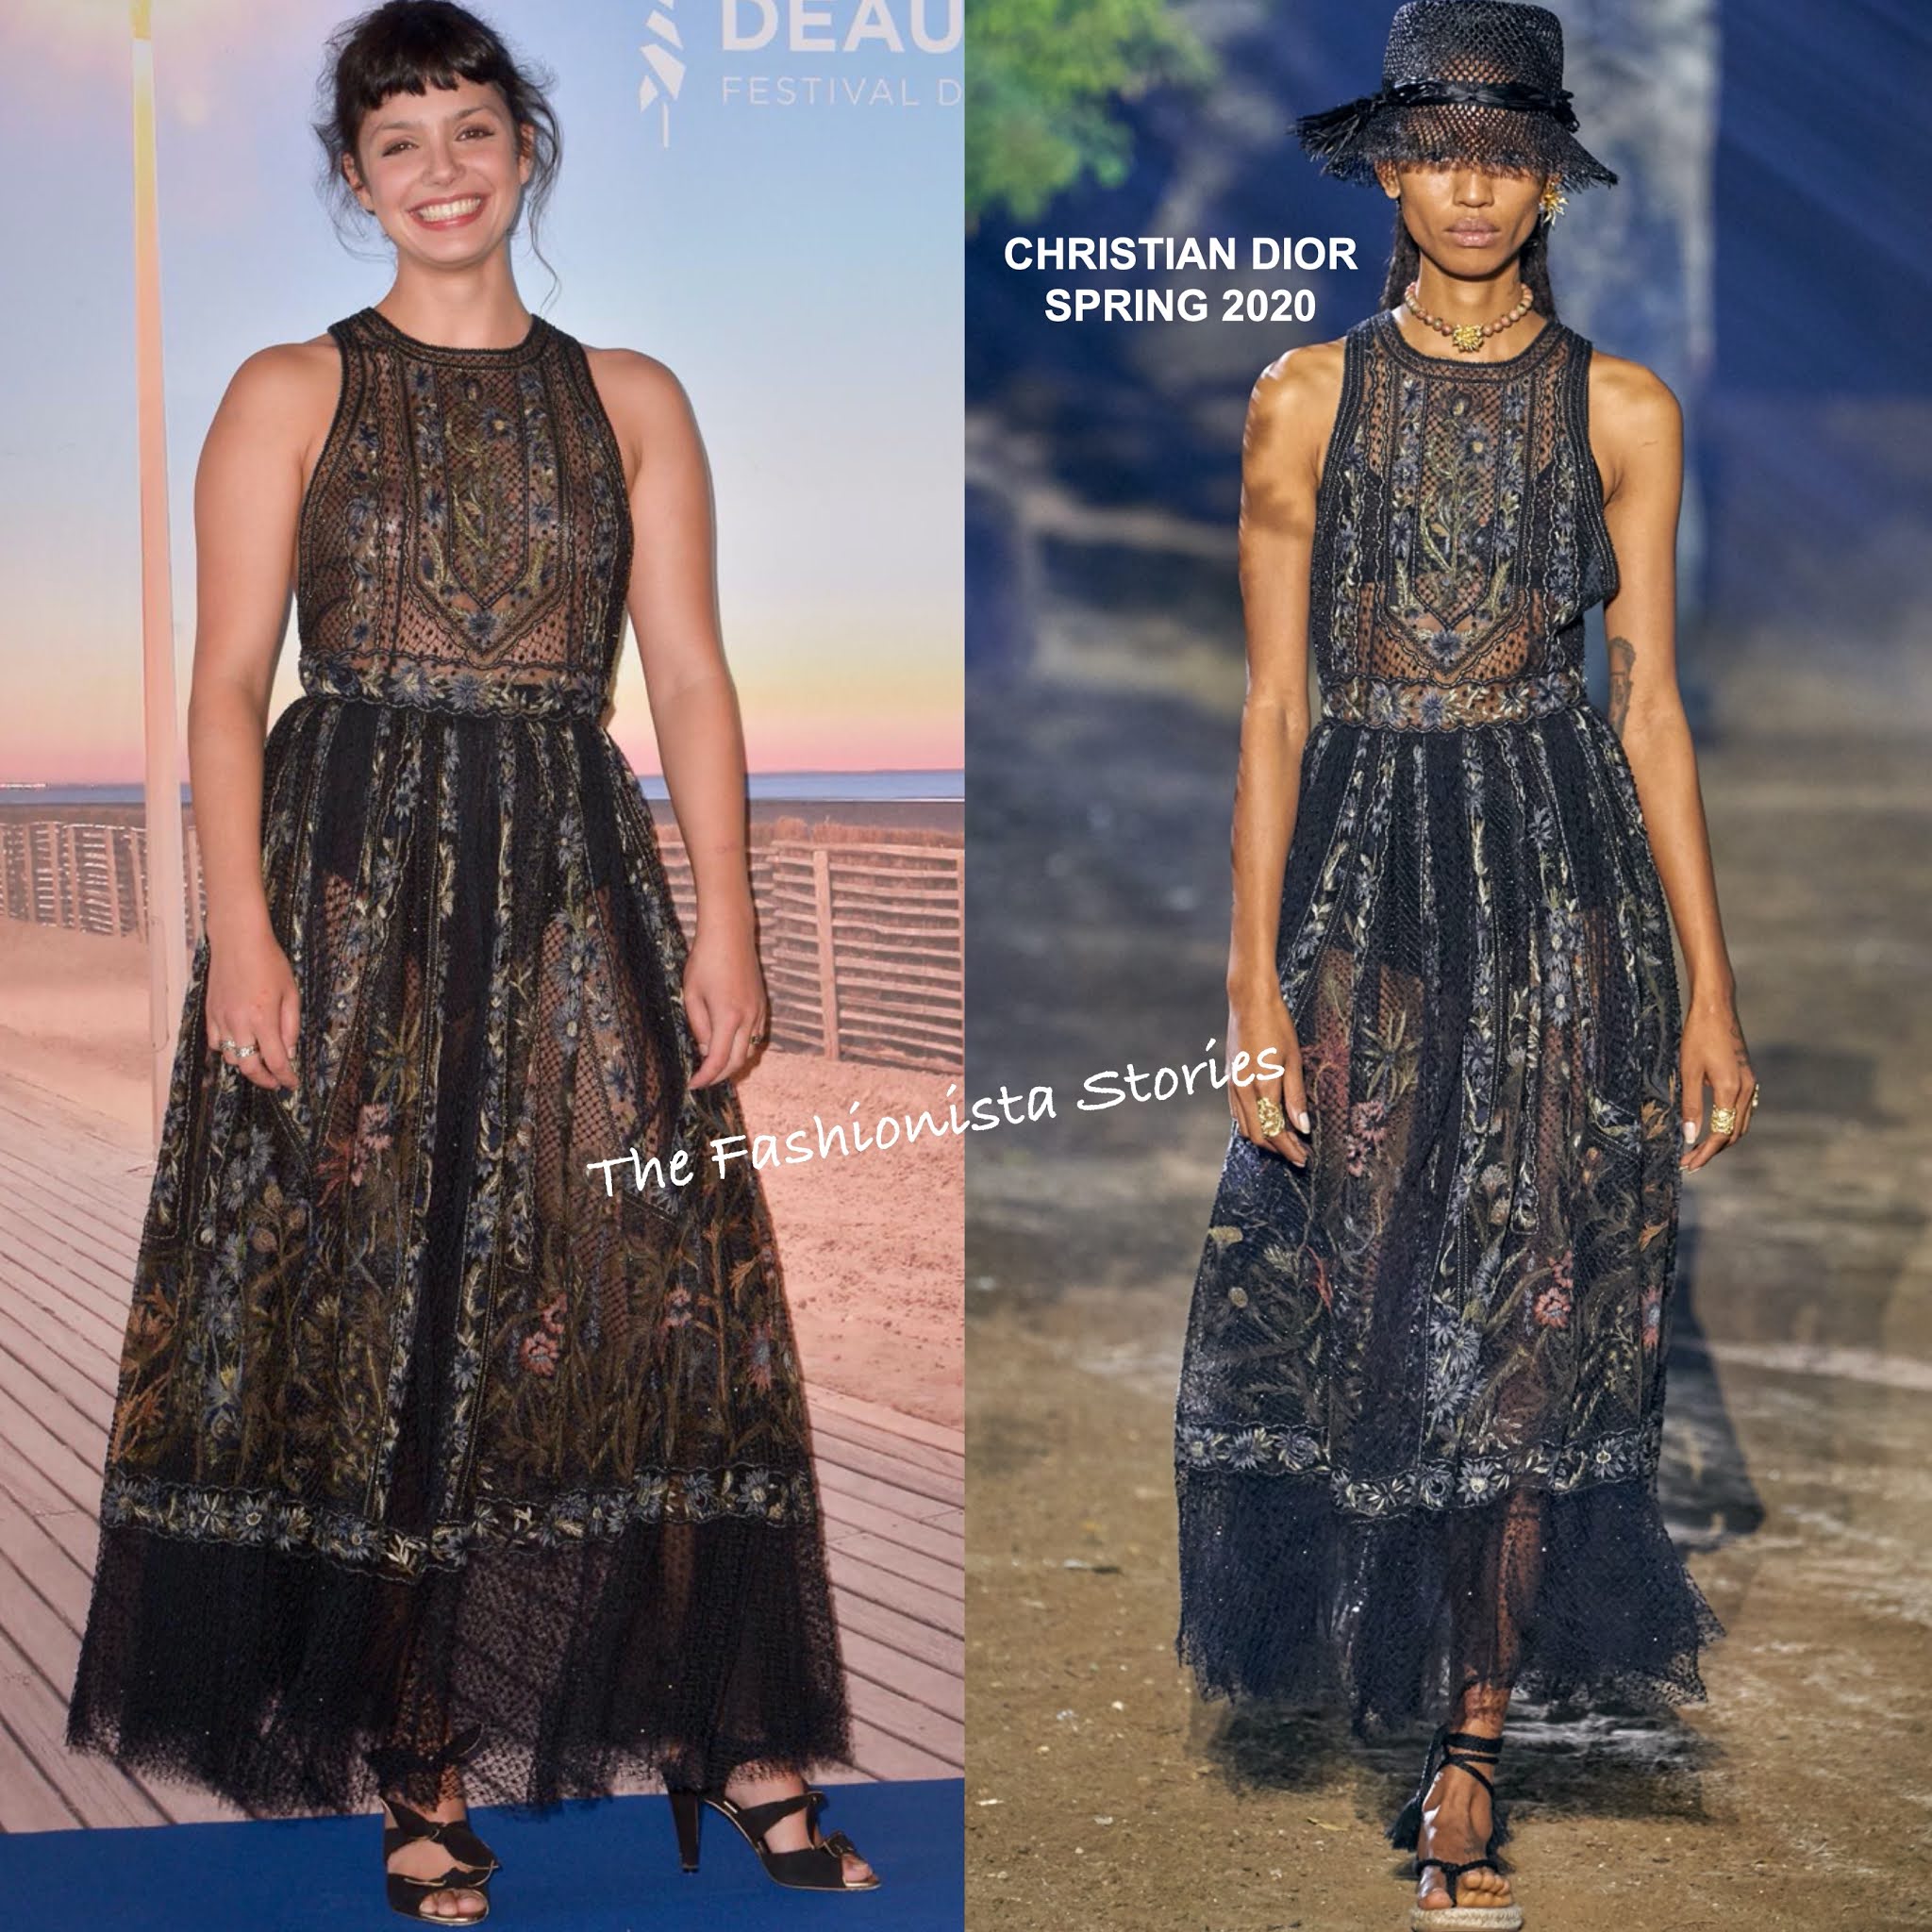 Noee Abita in Christian Dior at the 'Slalom' 46th Deauville Film Festival  Photocall